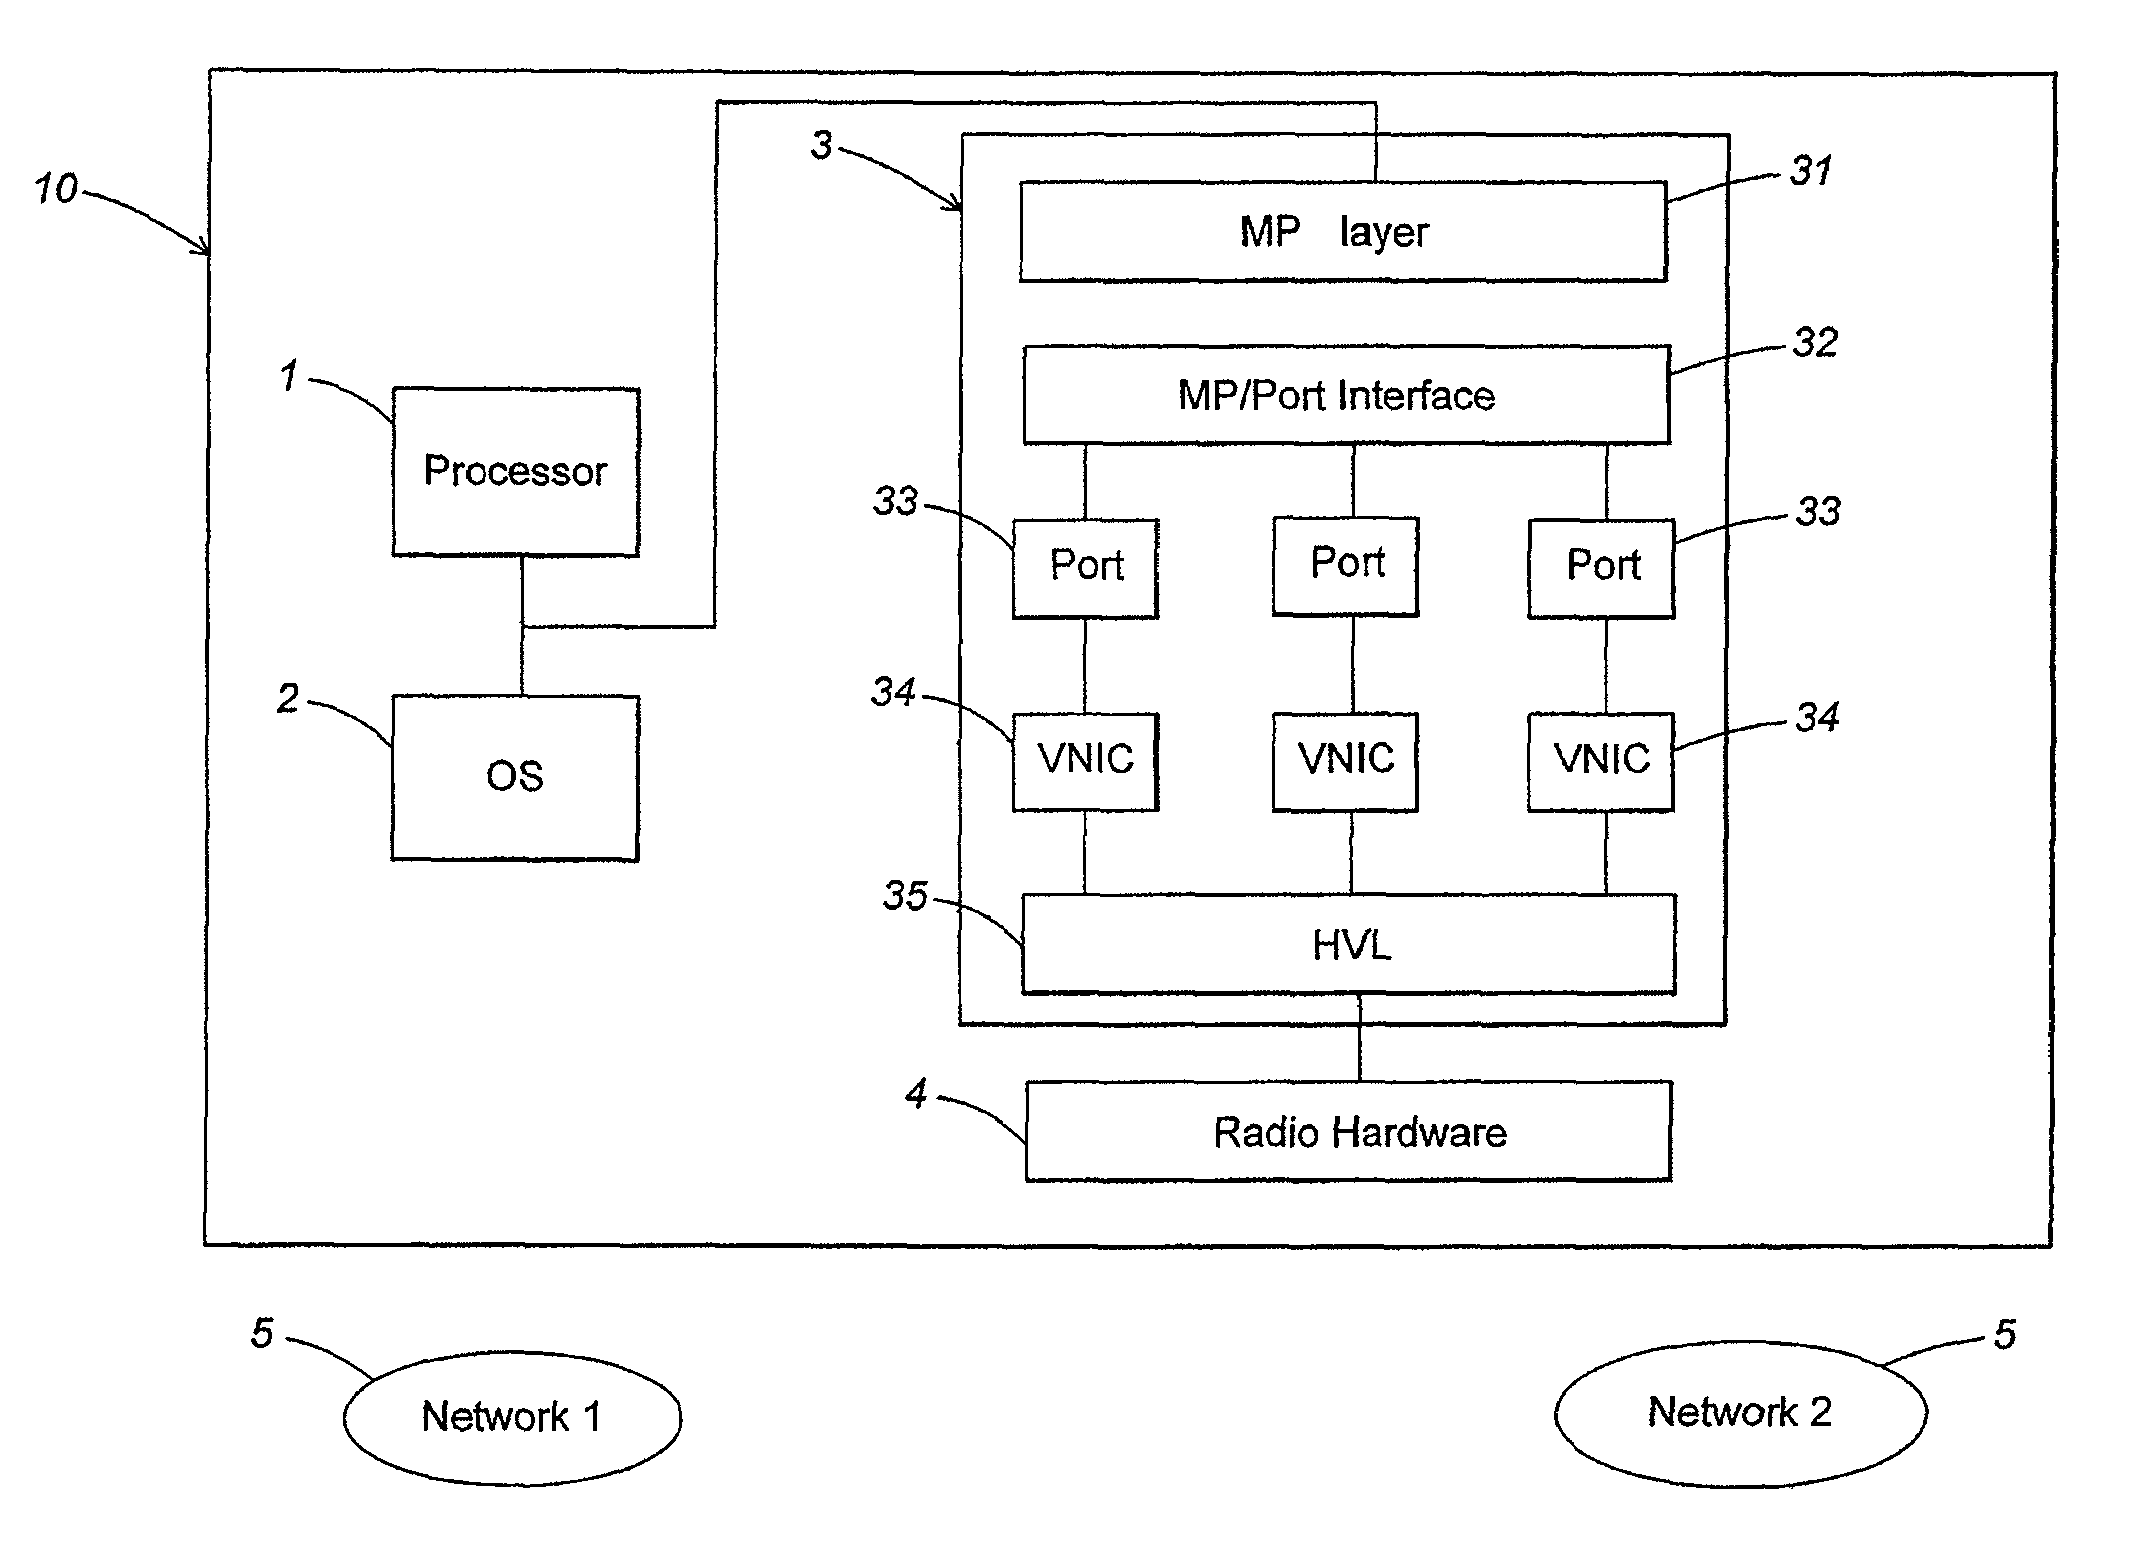 Maintaining multiple, simultaneous wireless network connections using a single radio